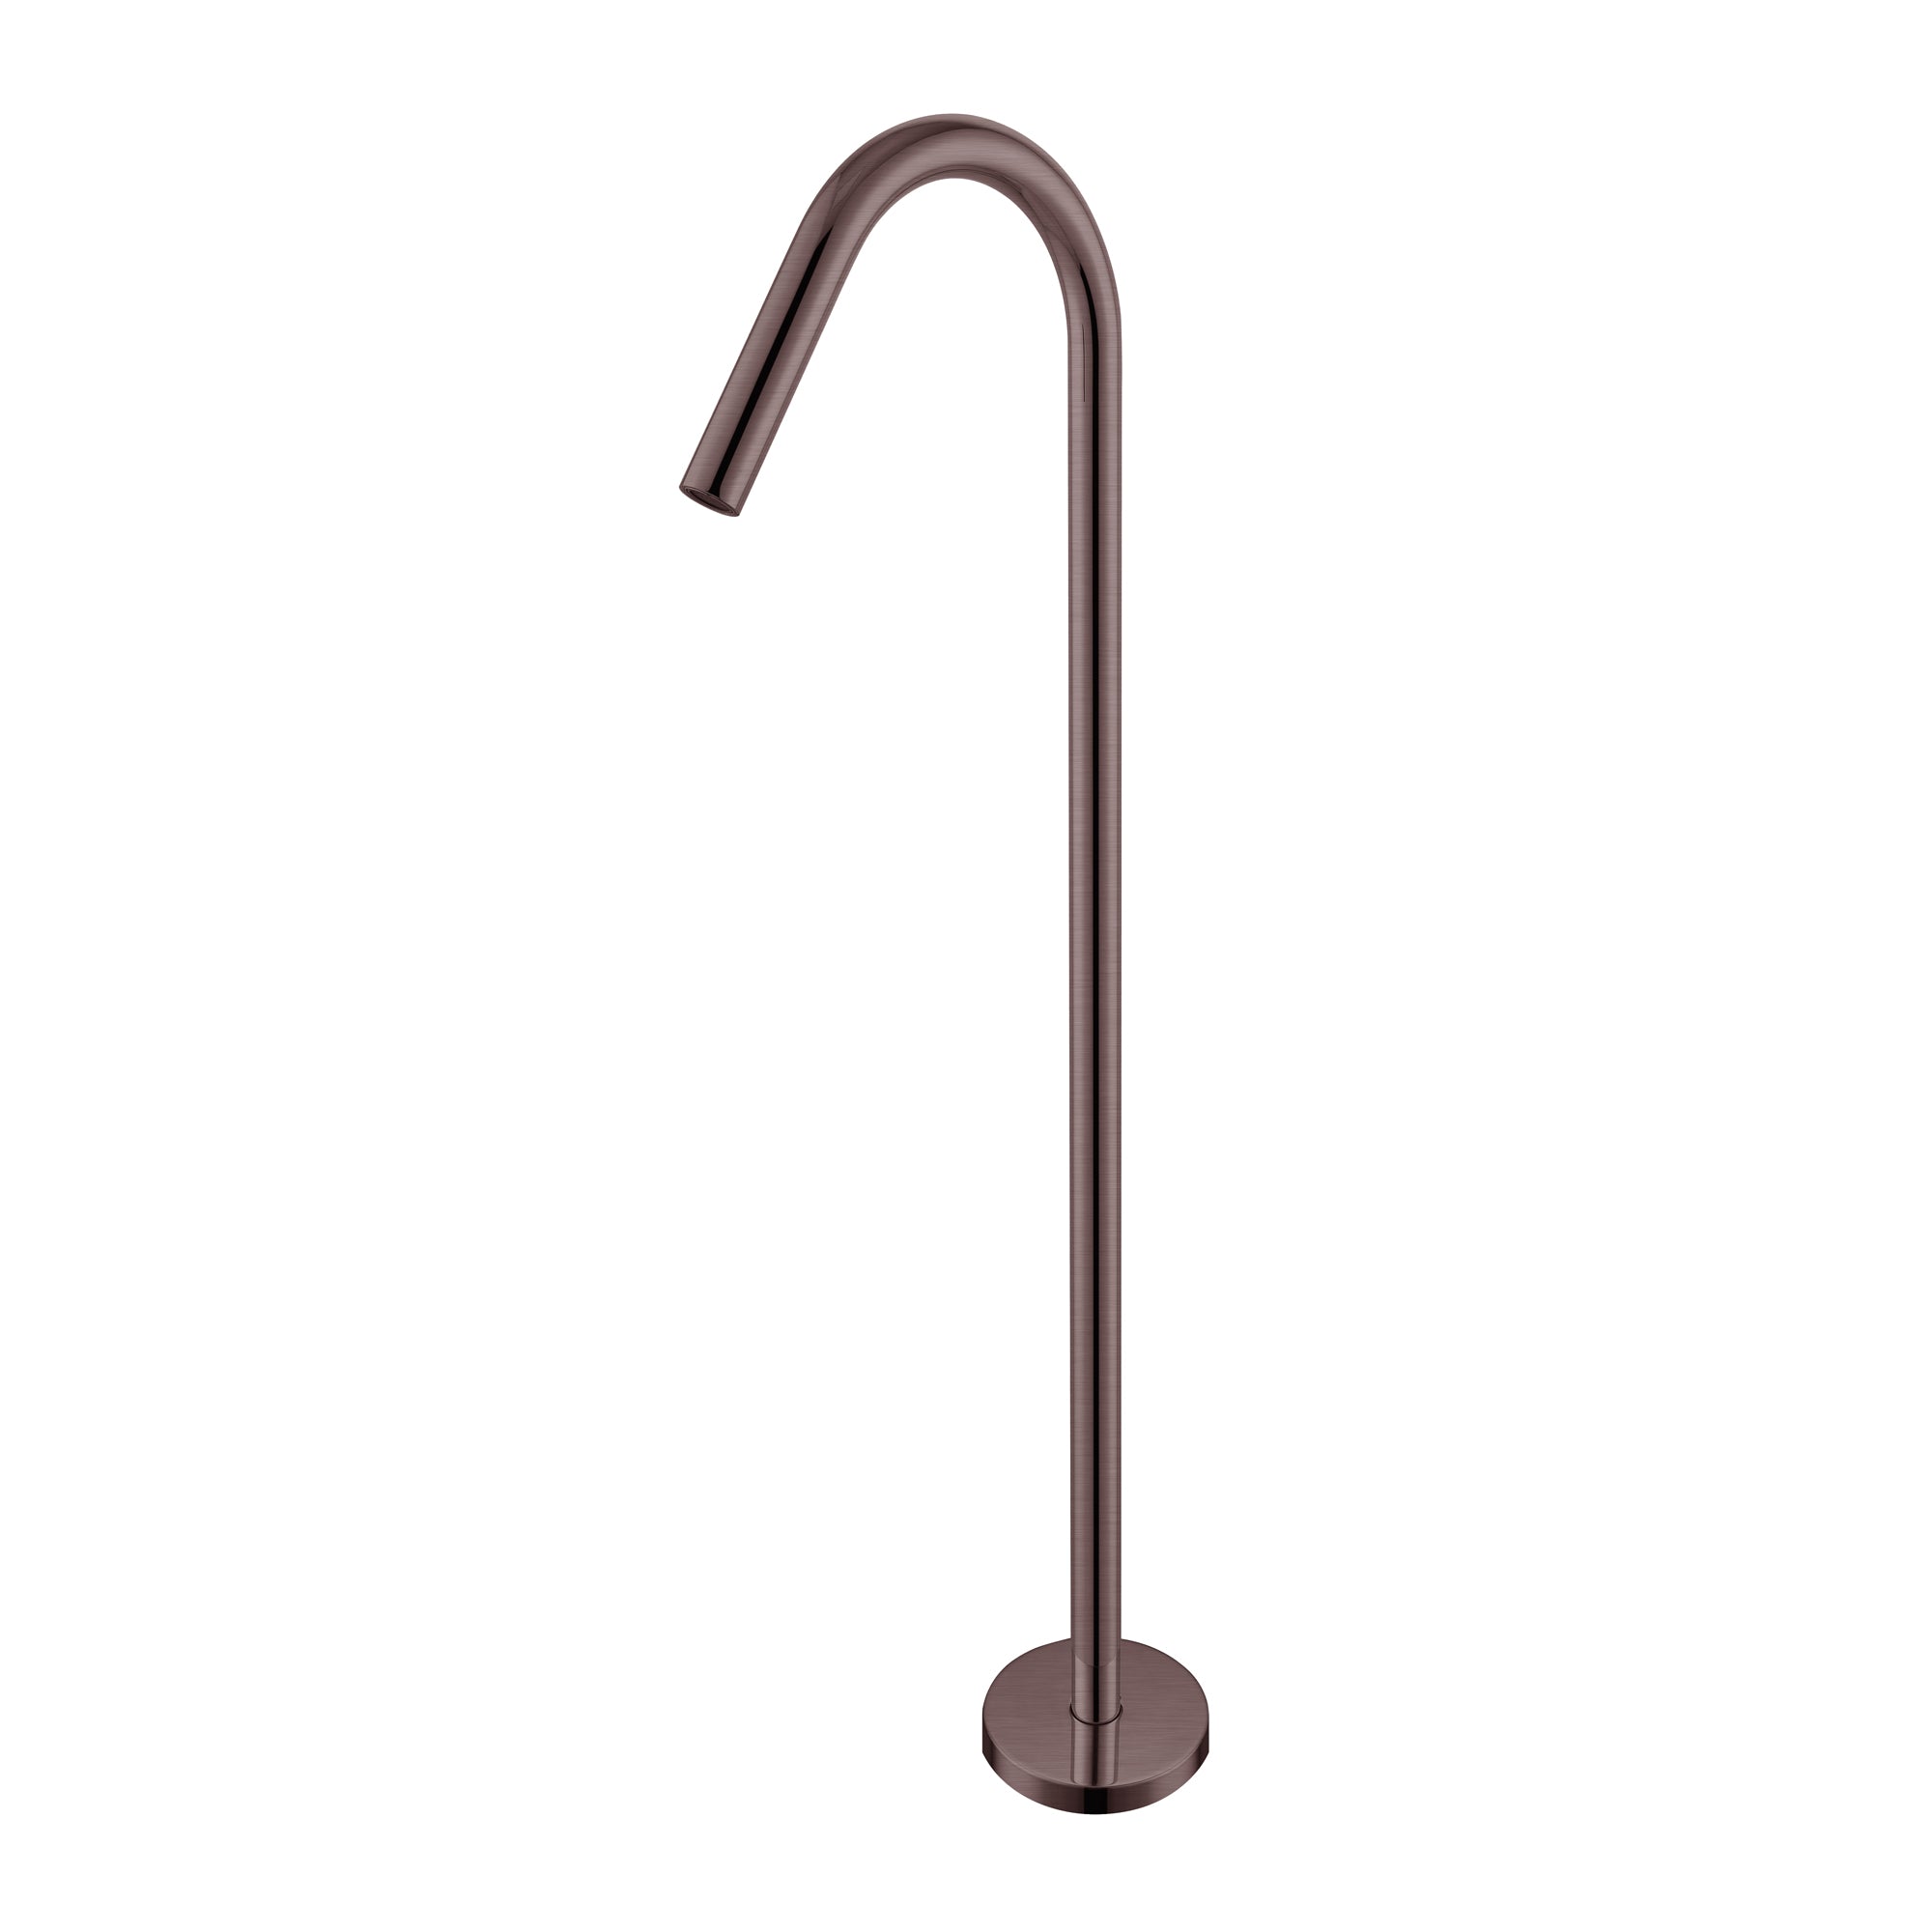 MECCA FREESTANDING BATH SPOUT ONLY BRUSHED BRONZE